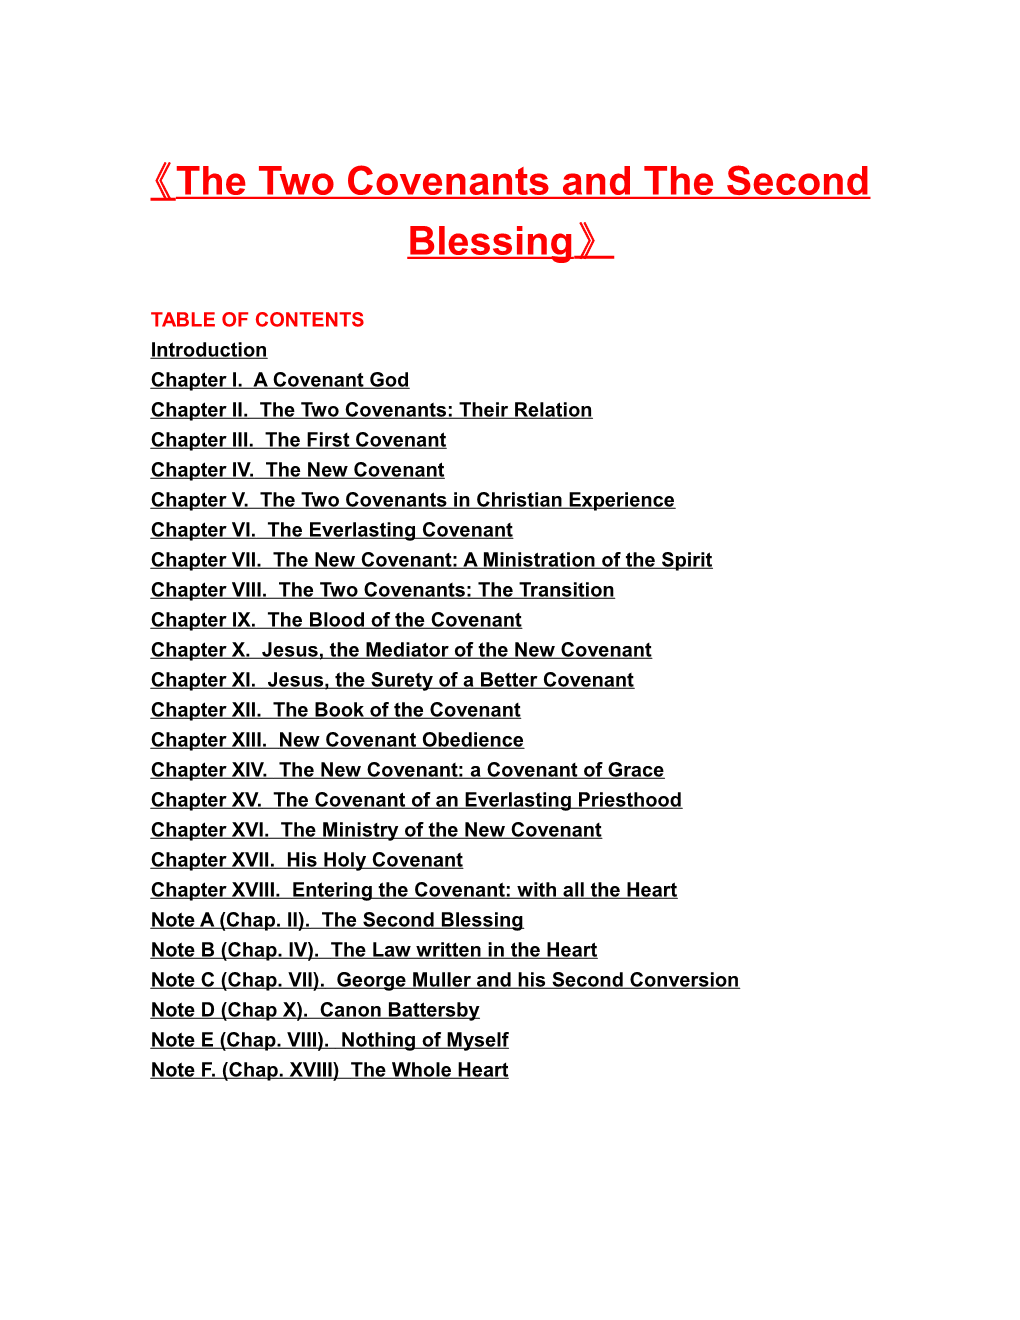 The Two Covenants and the Second Blessing